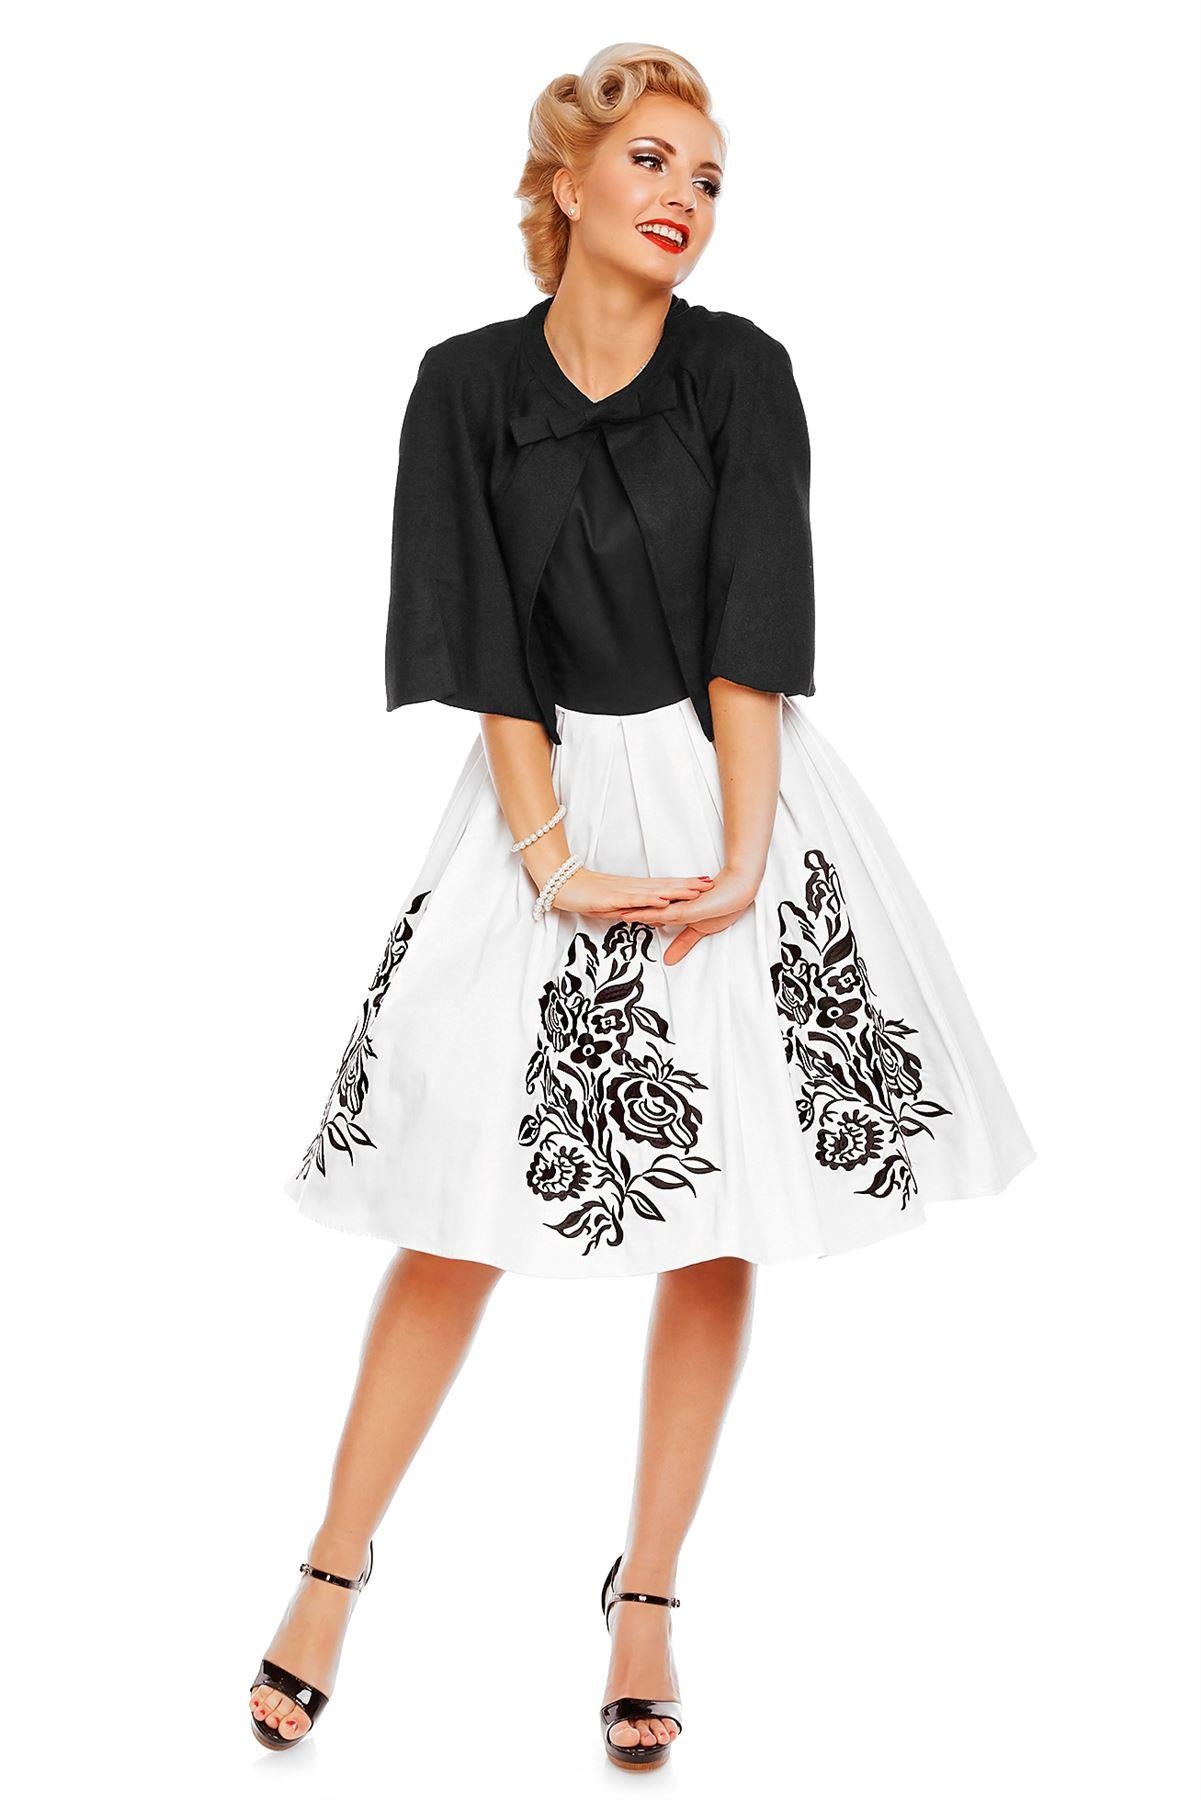 Embroidered Roses Swing Dress in Black/White